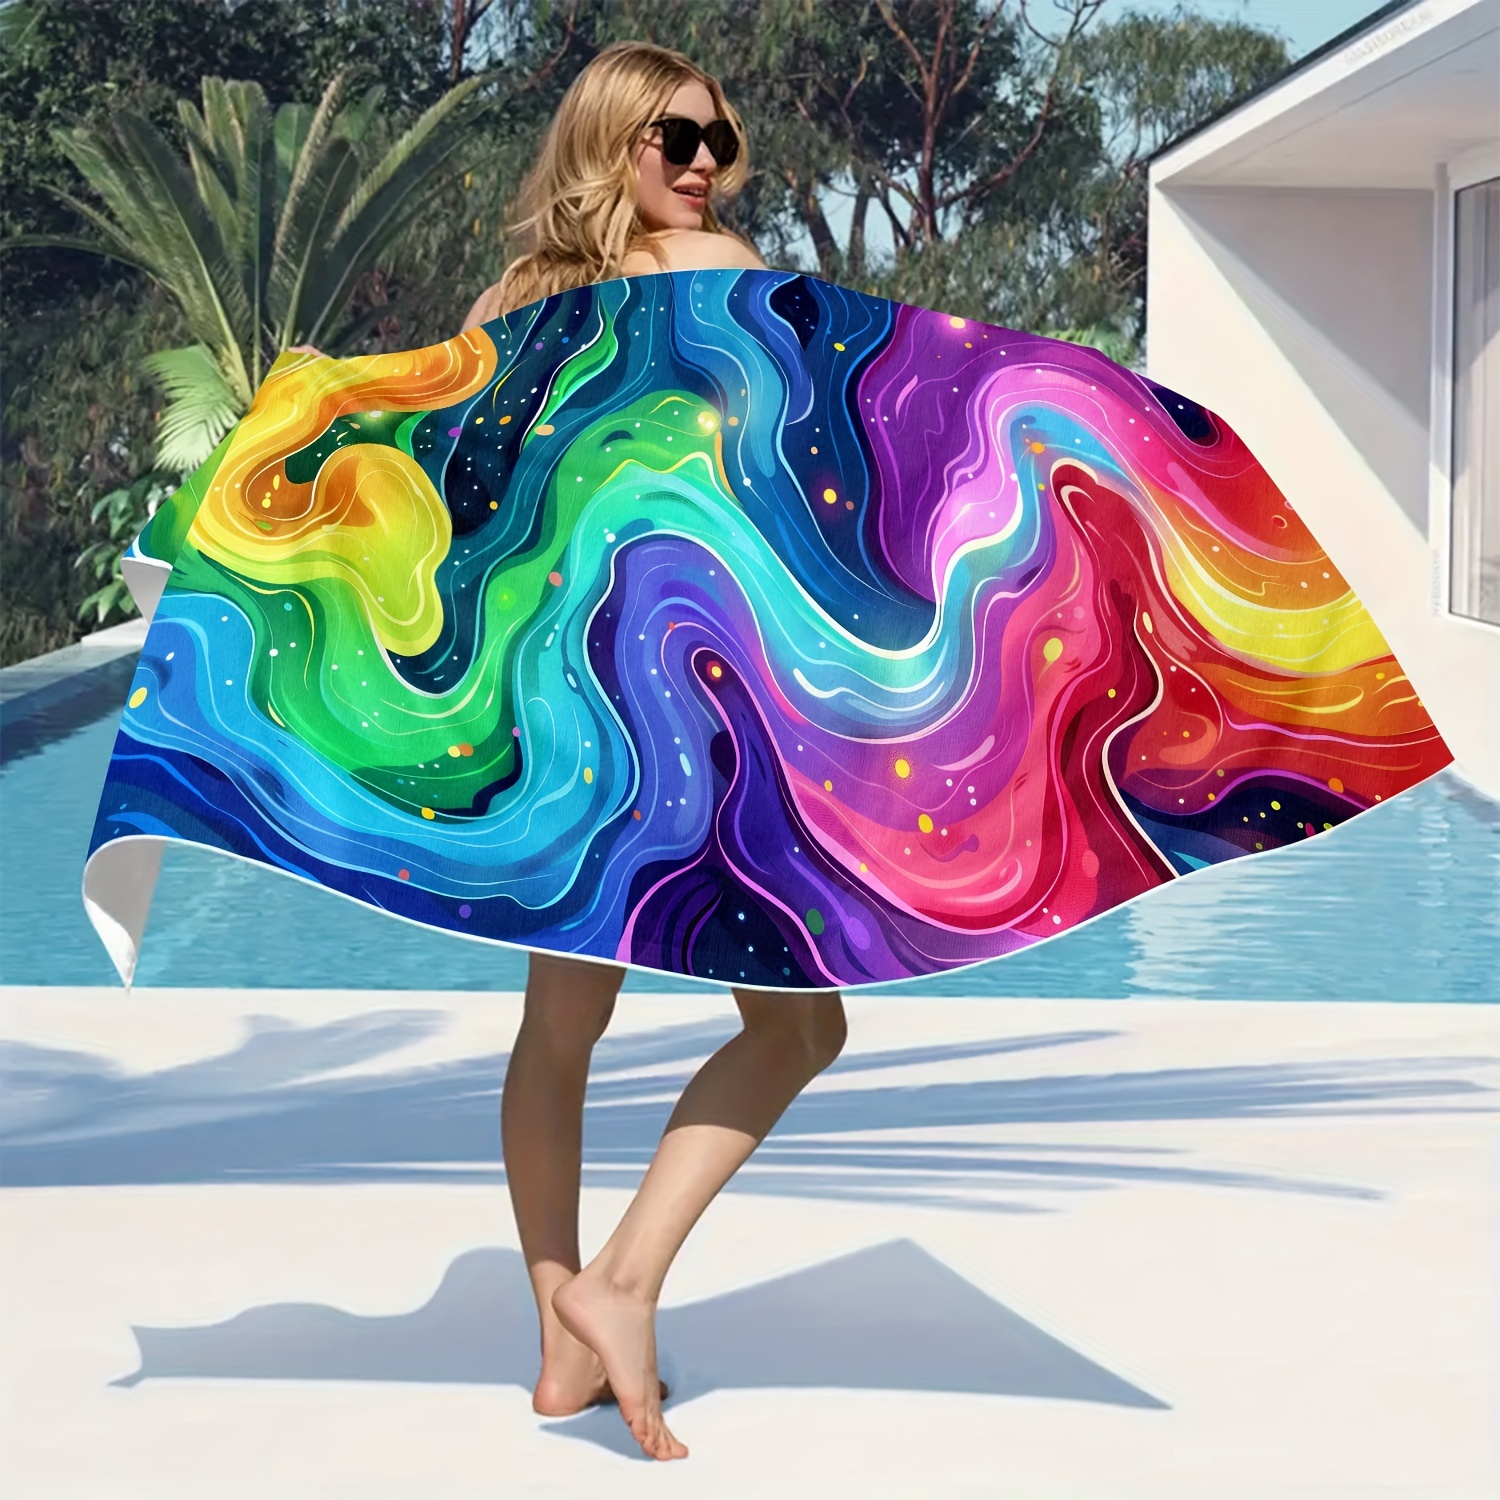 

Rainbow Extra Large Microfiber Beach Towel, Super Absorbent Quick Dry, Thick Soft Sand Free Towel For Beach, Pool, Swimming, Bath, Travel & Picnic - Machine Washable